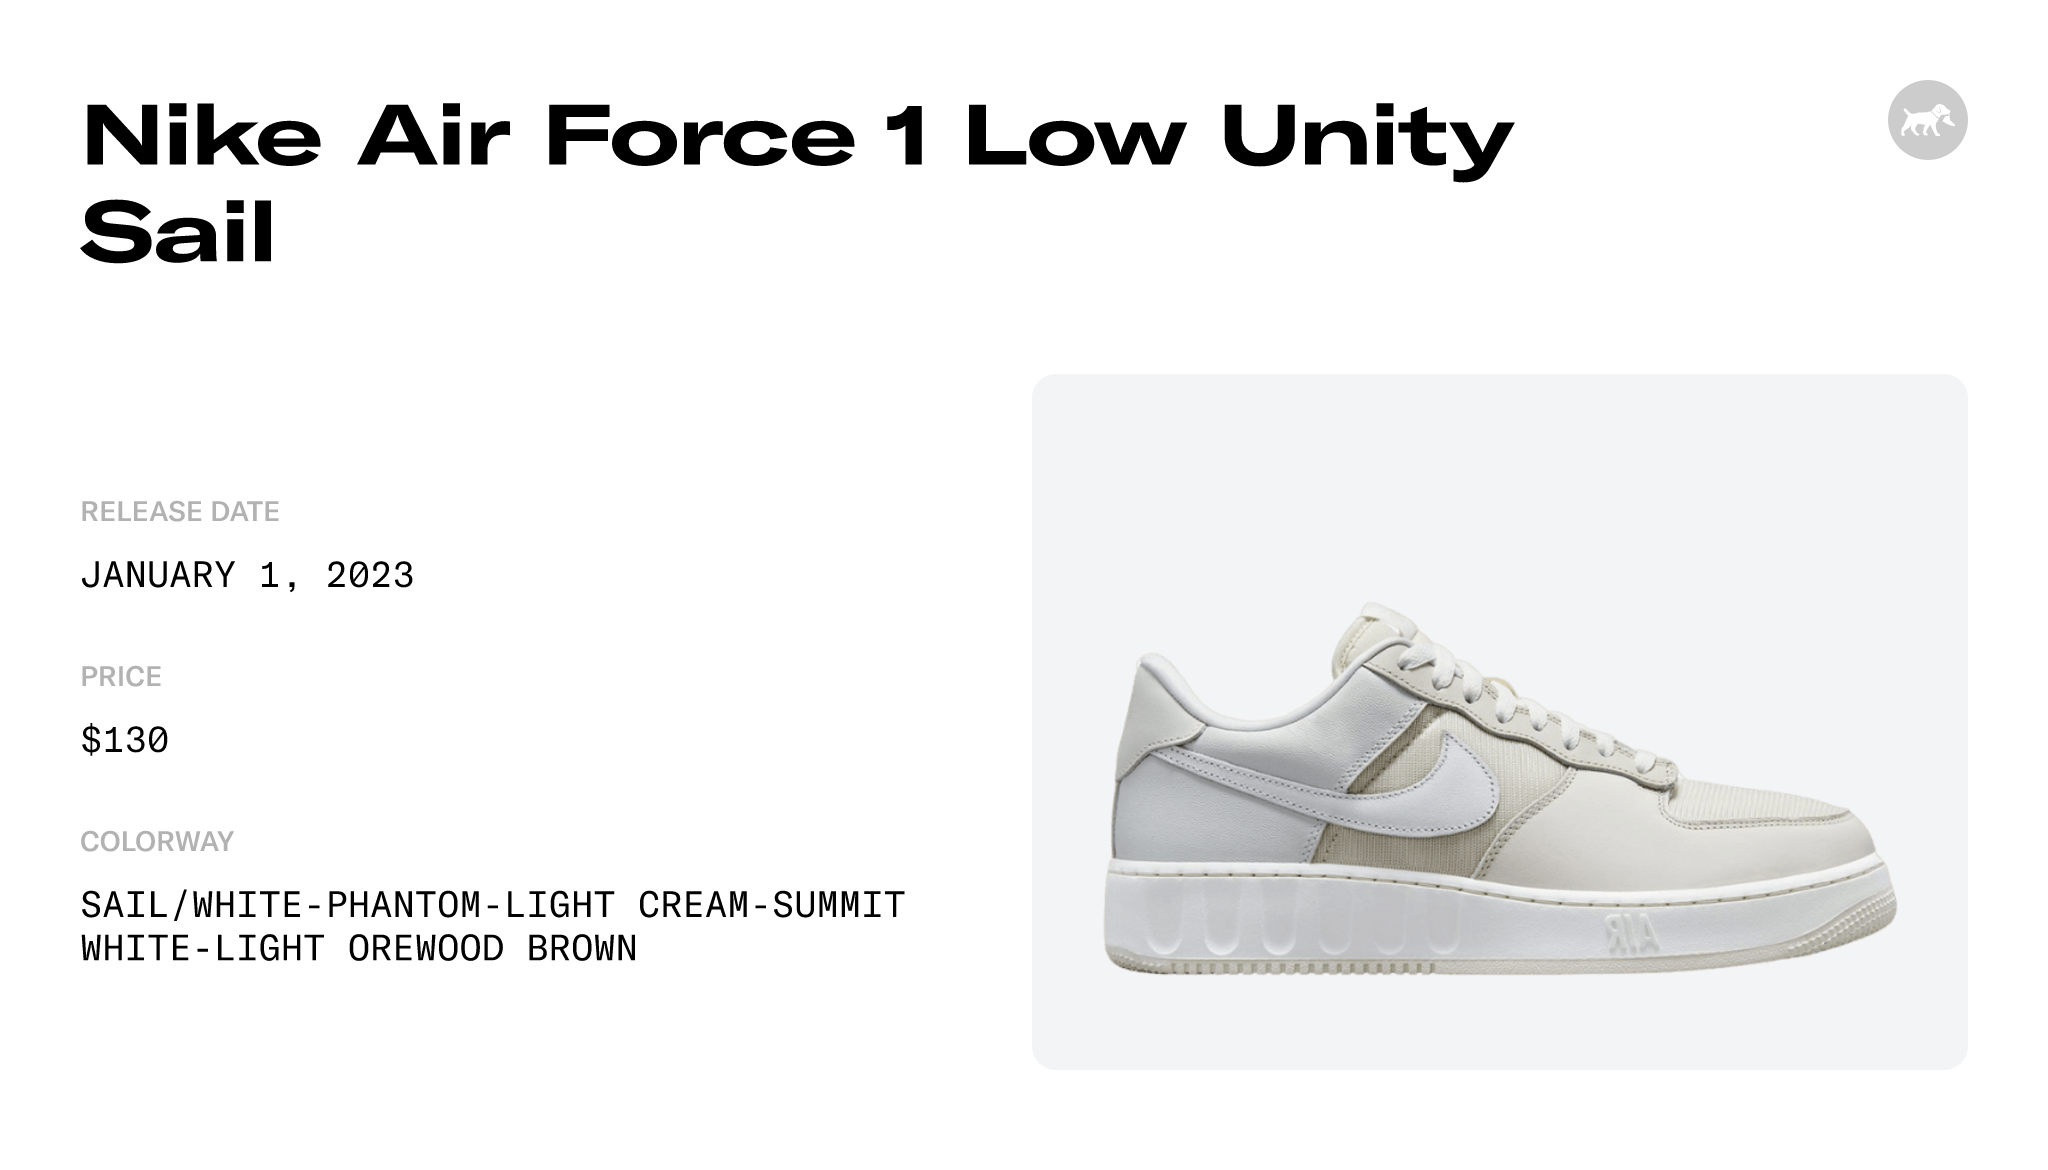 Nike Air Force 1 Low Unity Sail - DM2385-101 Raffles and Release Date